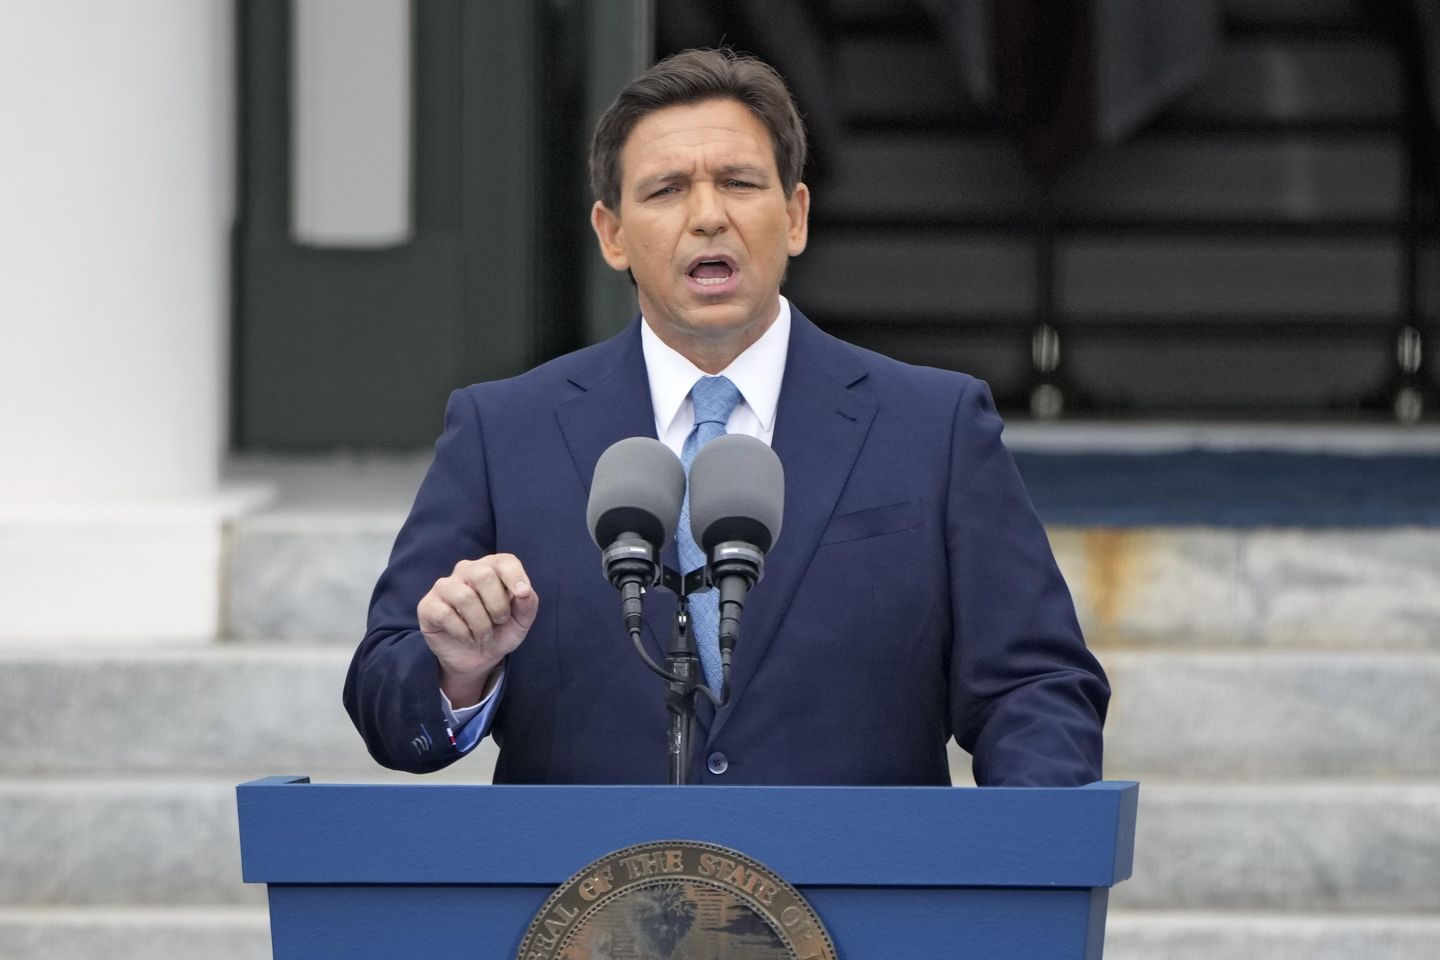 Ron DeSantis strips liquor license from a theater that let kids watch drag queen show